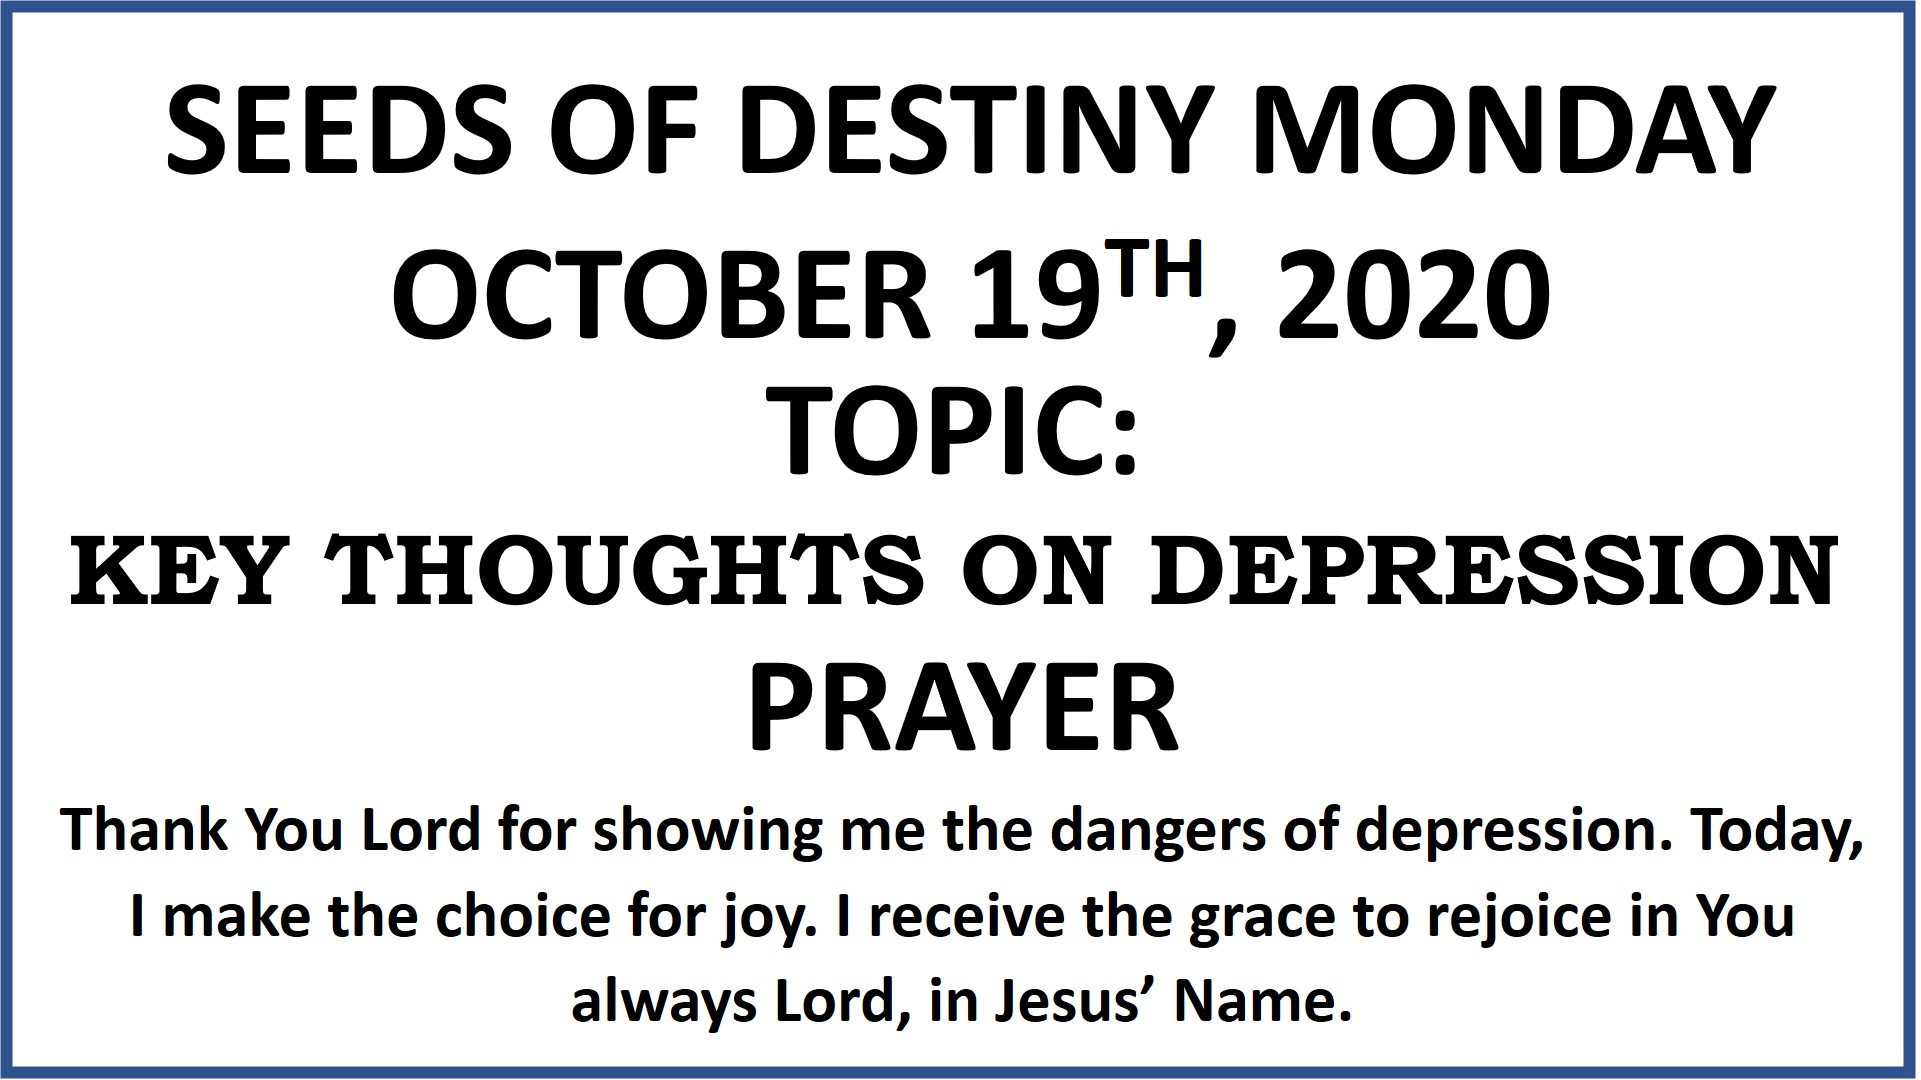 Seeds of Destiny Monday 19th October 2020 by Dr Paul Enenche